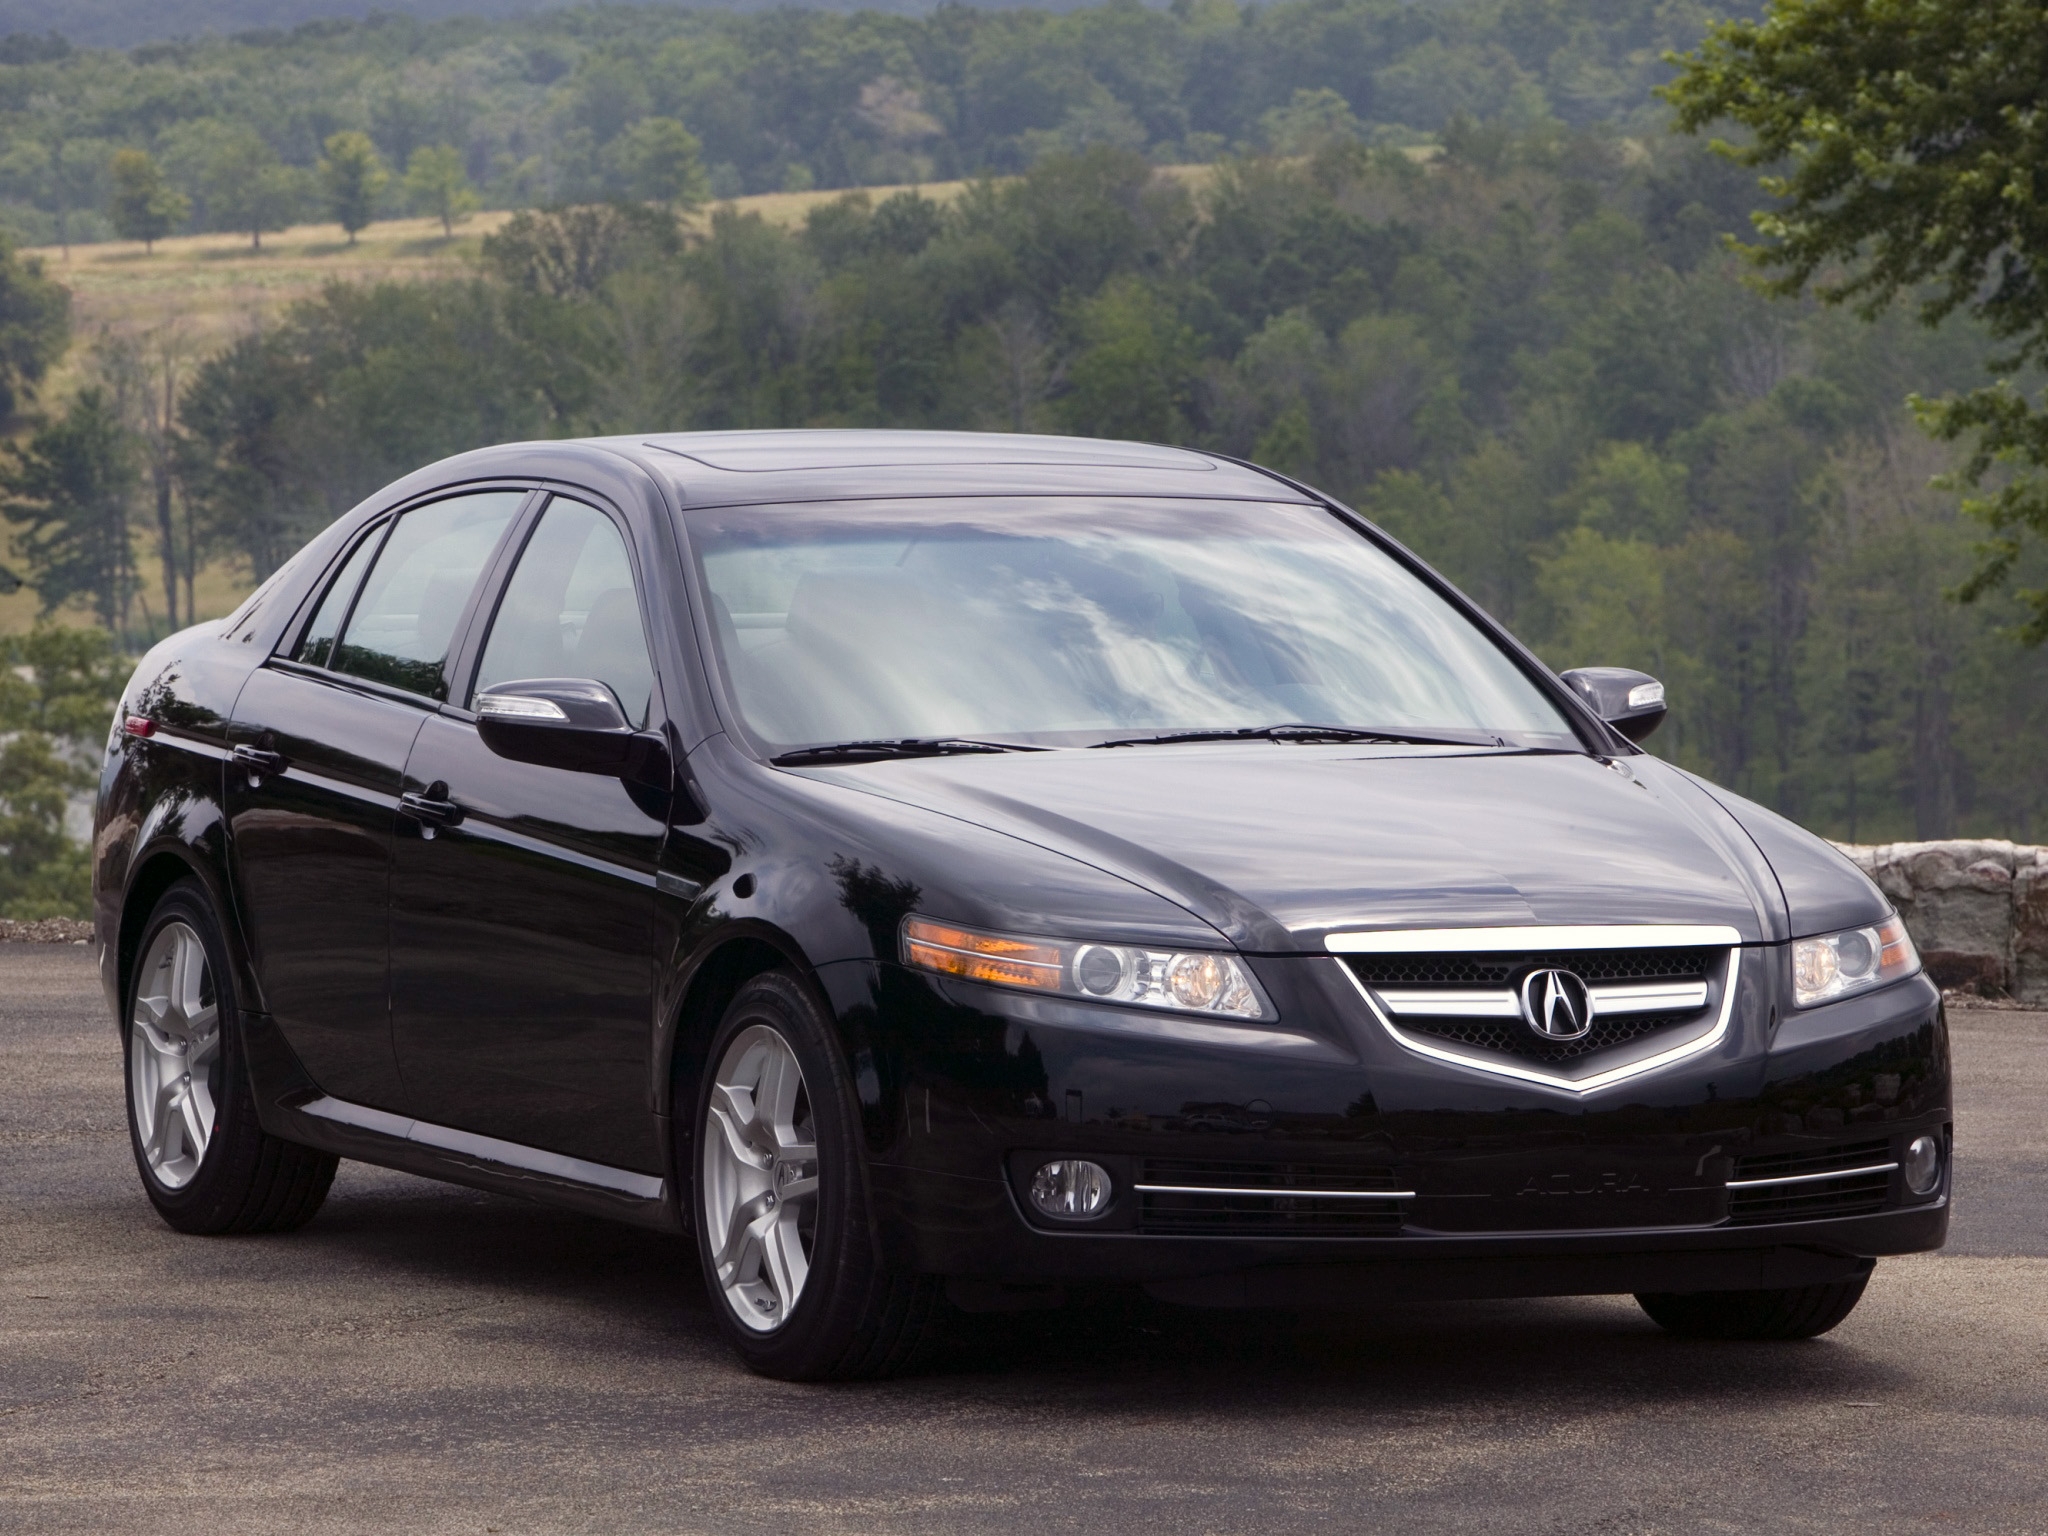 vertical wallpaper auto, nature, trees, acura, cars, black, front view, style, akura, tl, 2007